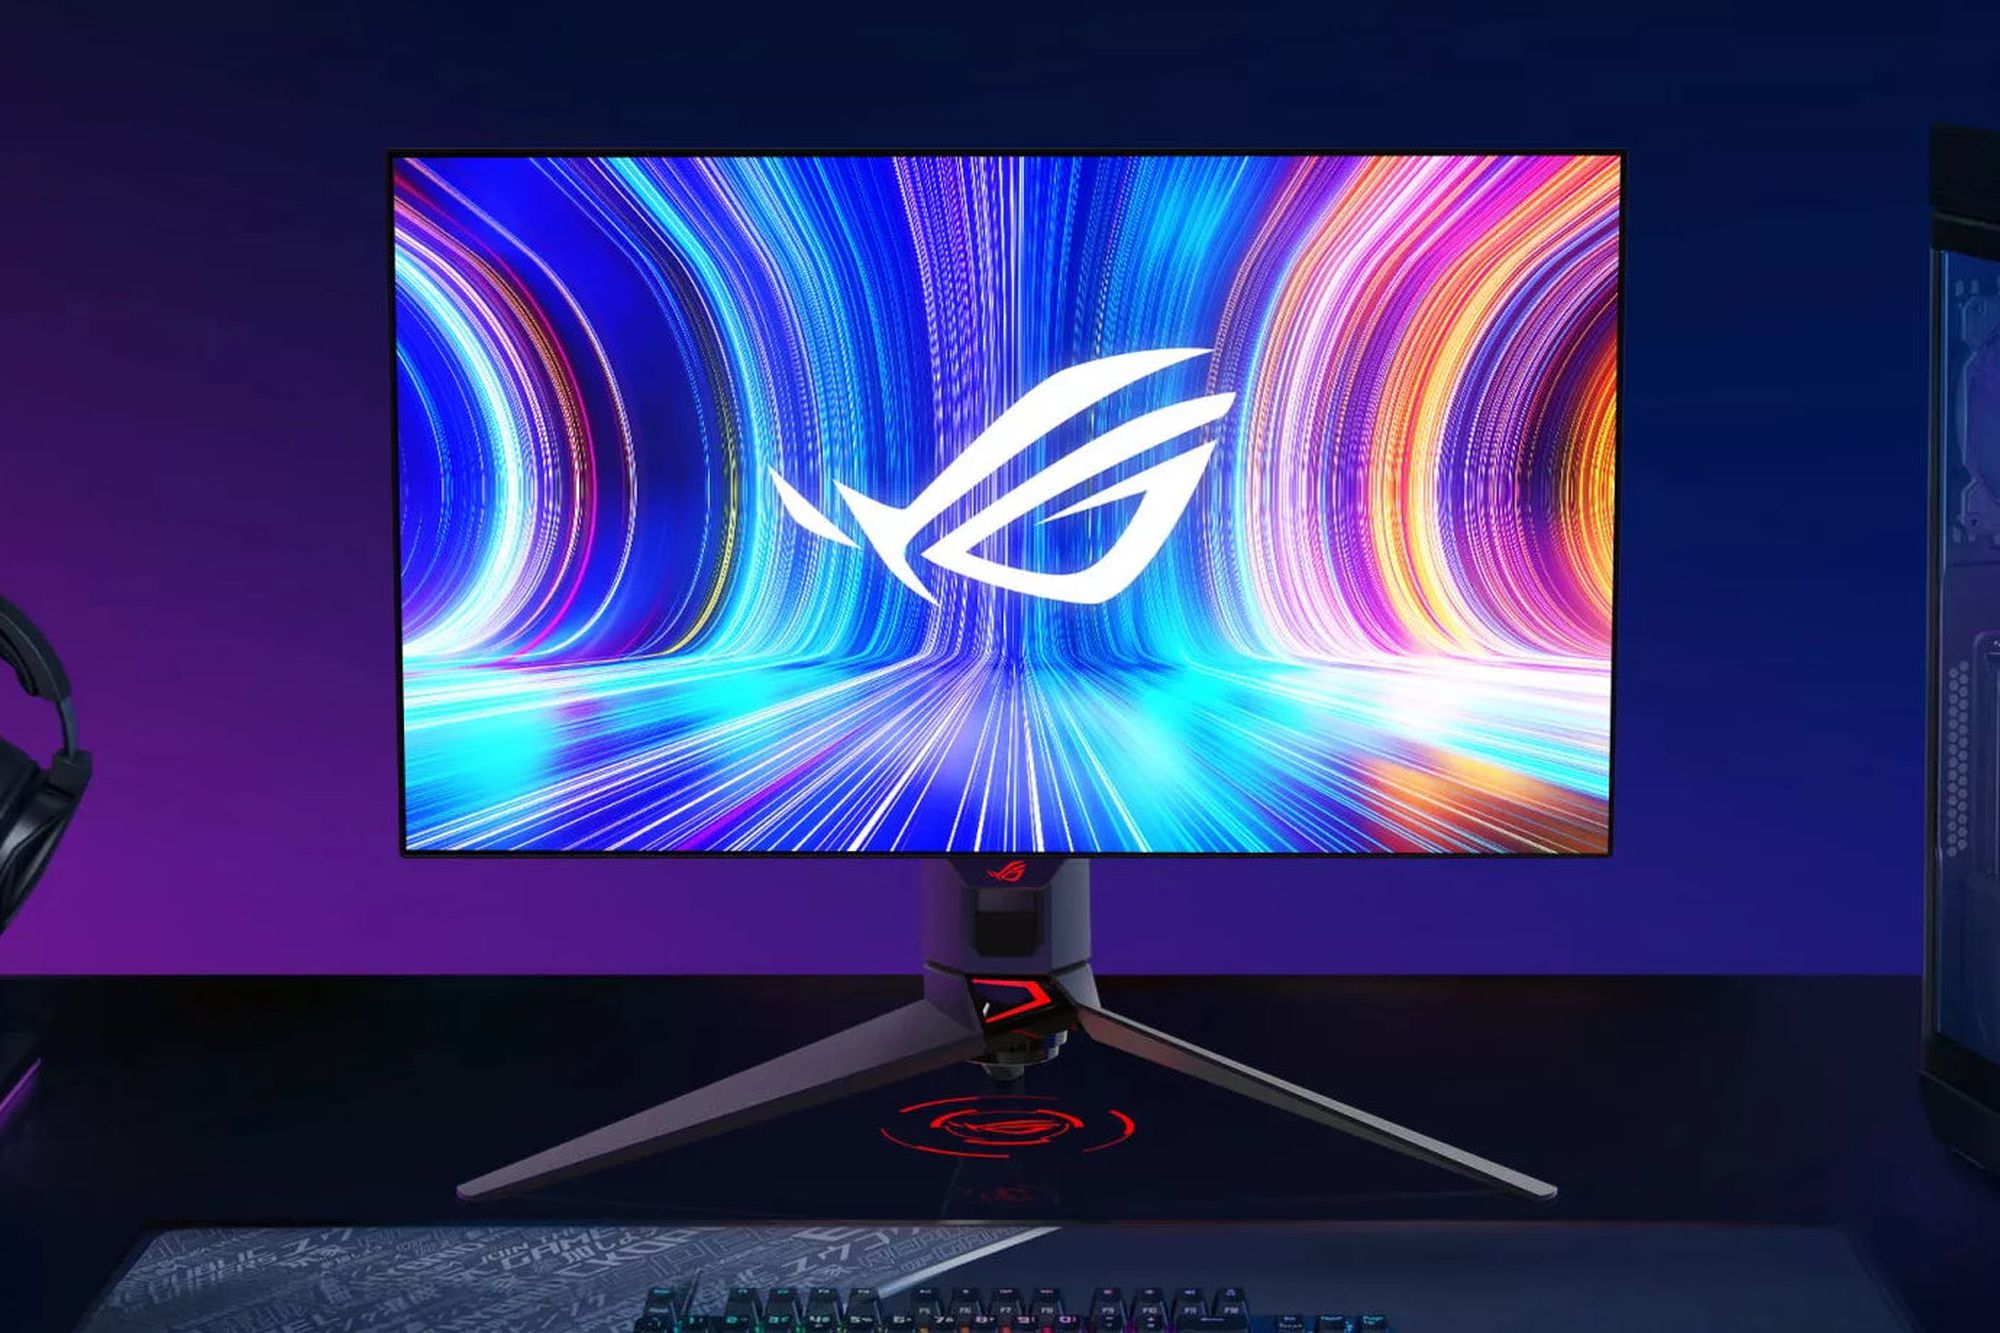 Asus Gaming Monitor 75Hz: How To Access The Quick Start Guide